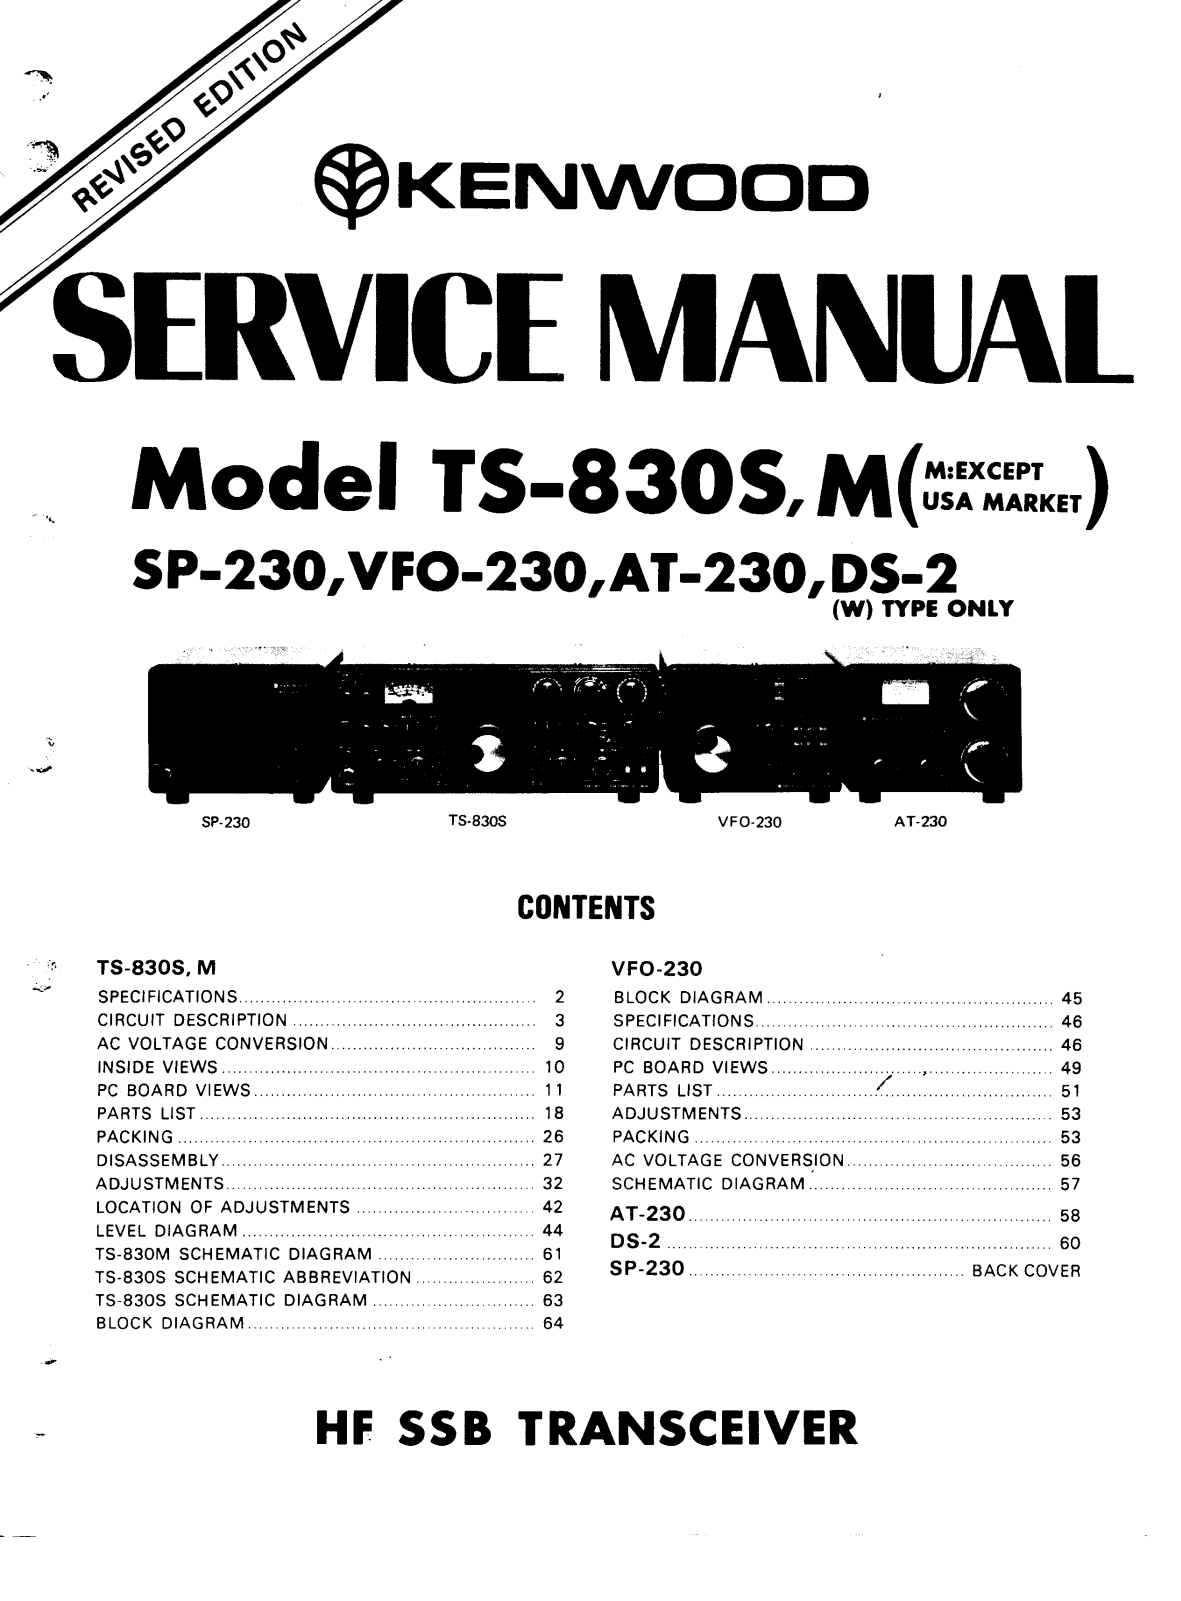 Kenwood DS-2, AT-230, VFO-230, SP-230, TS-830M Service Manual